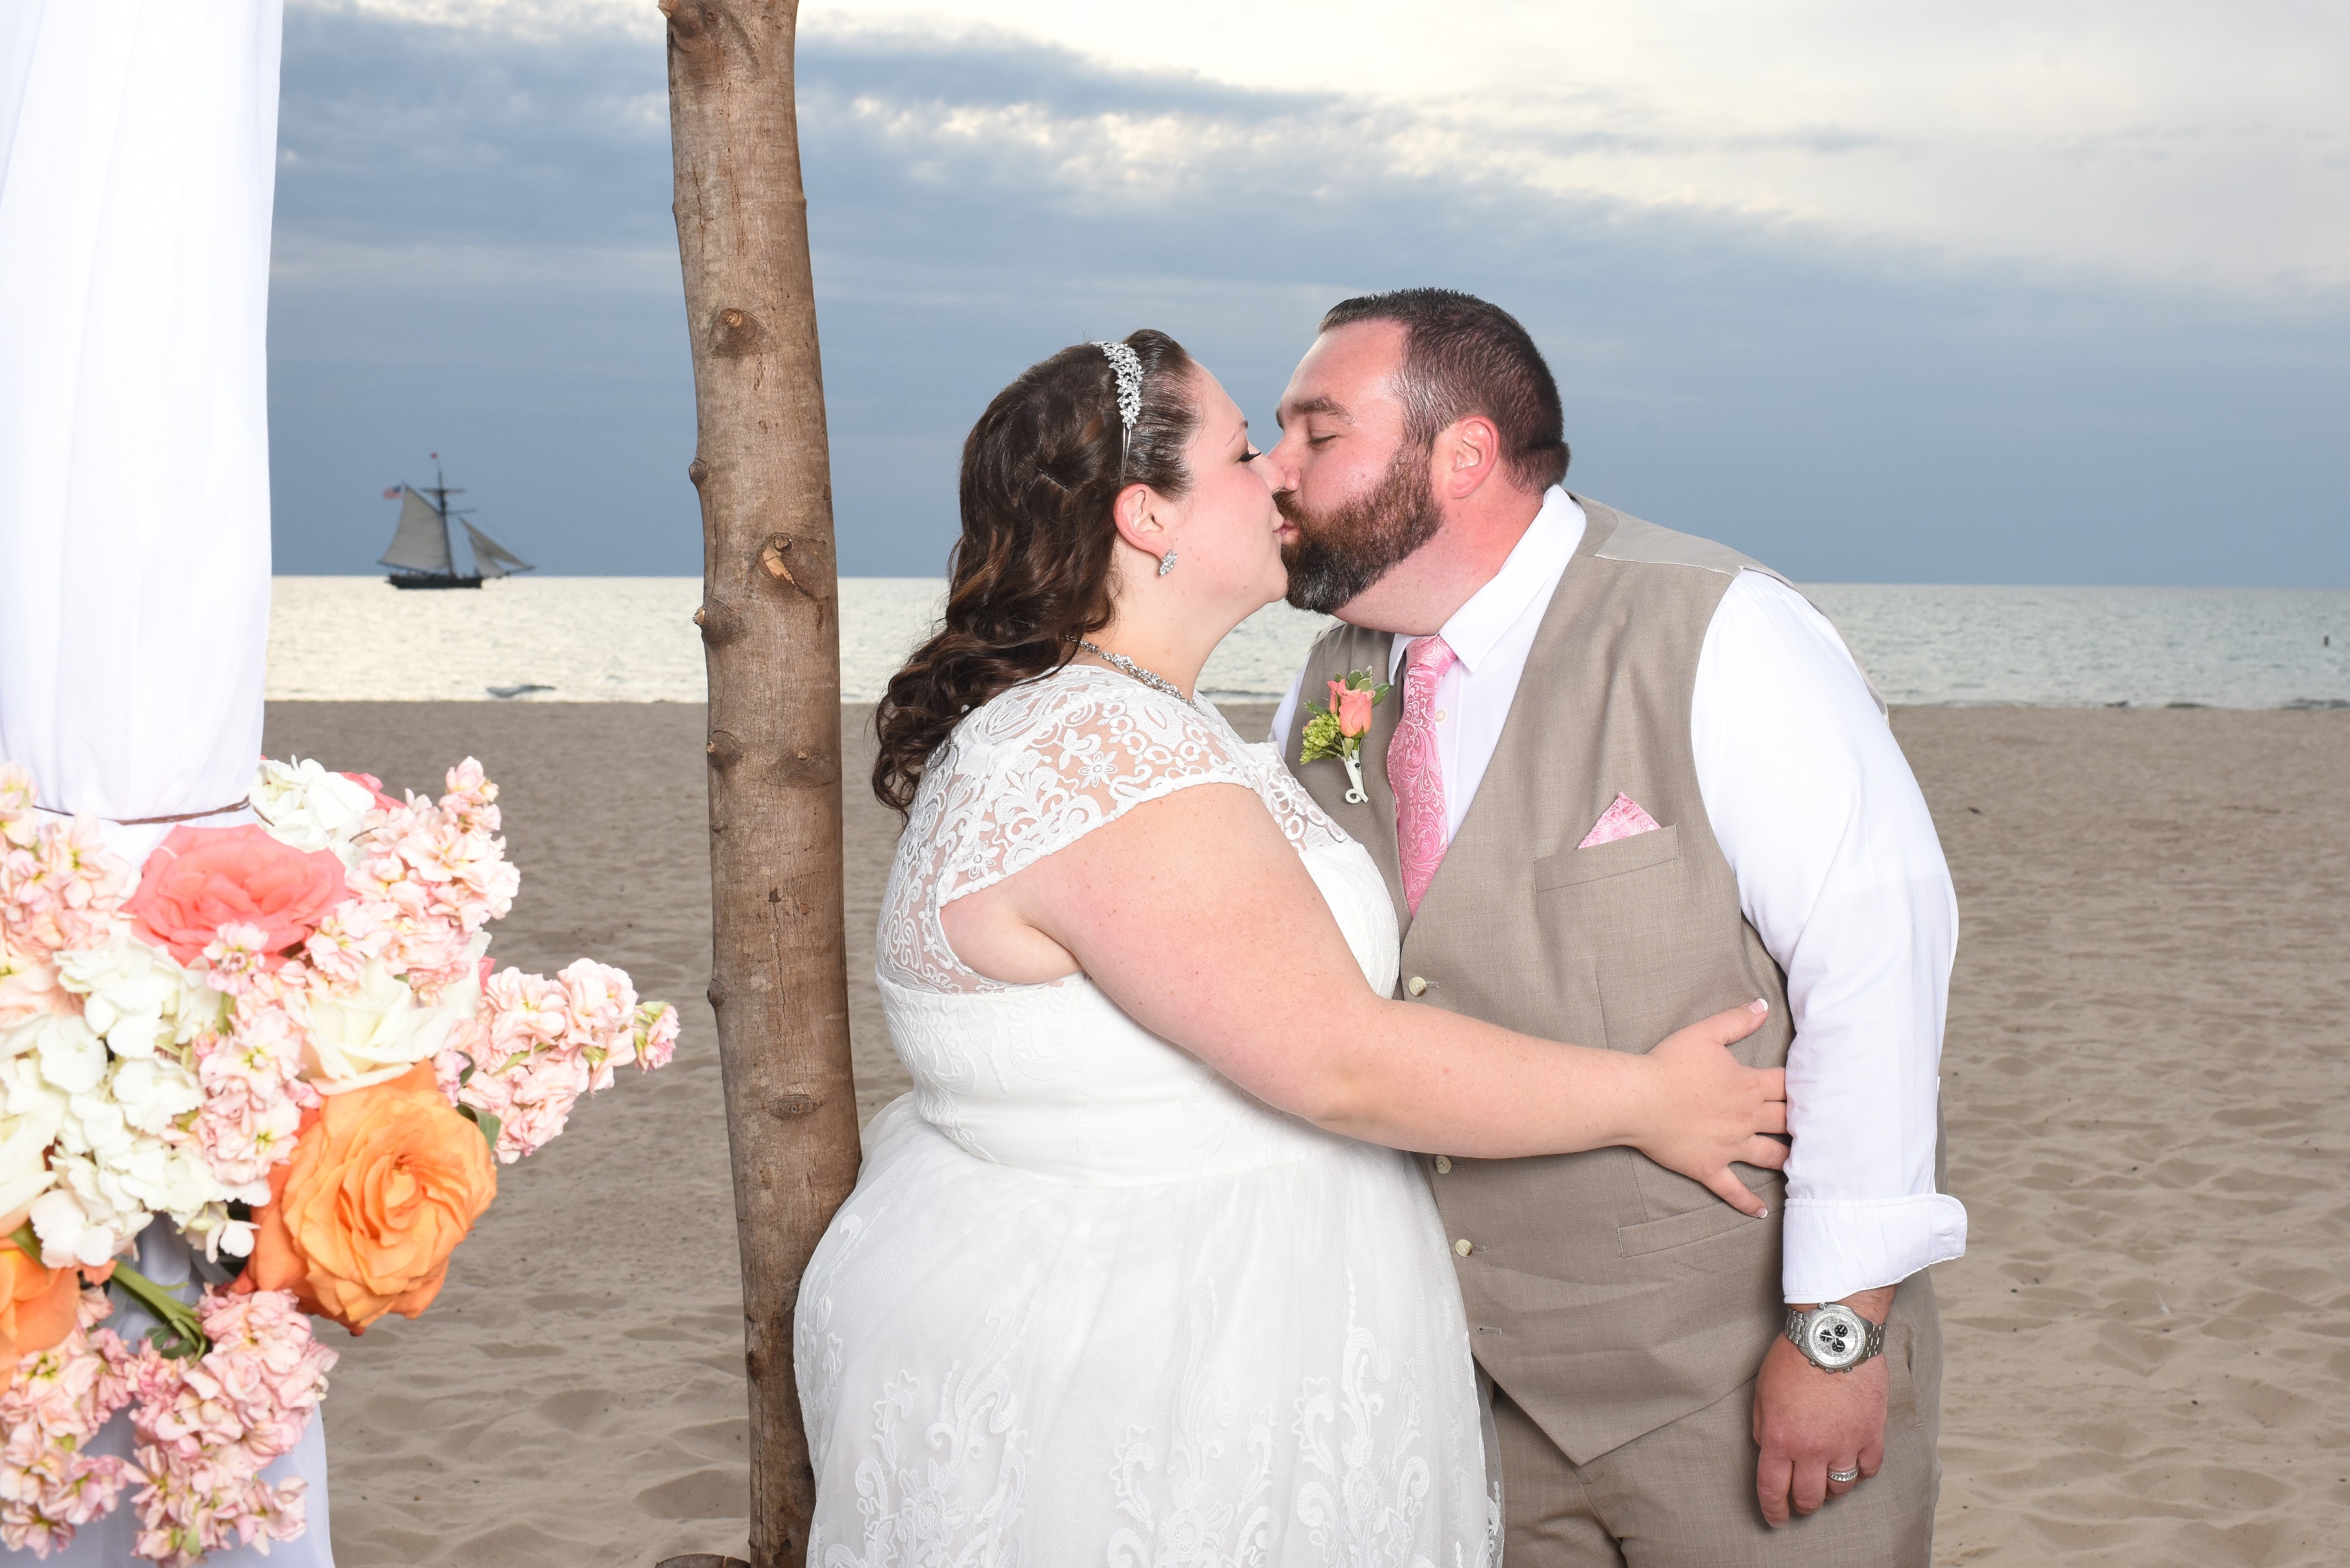 Newleyweds kissing with arbor and sailboat in background